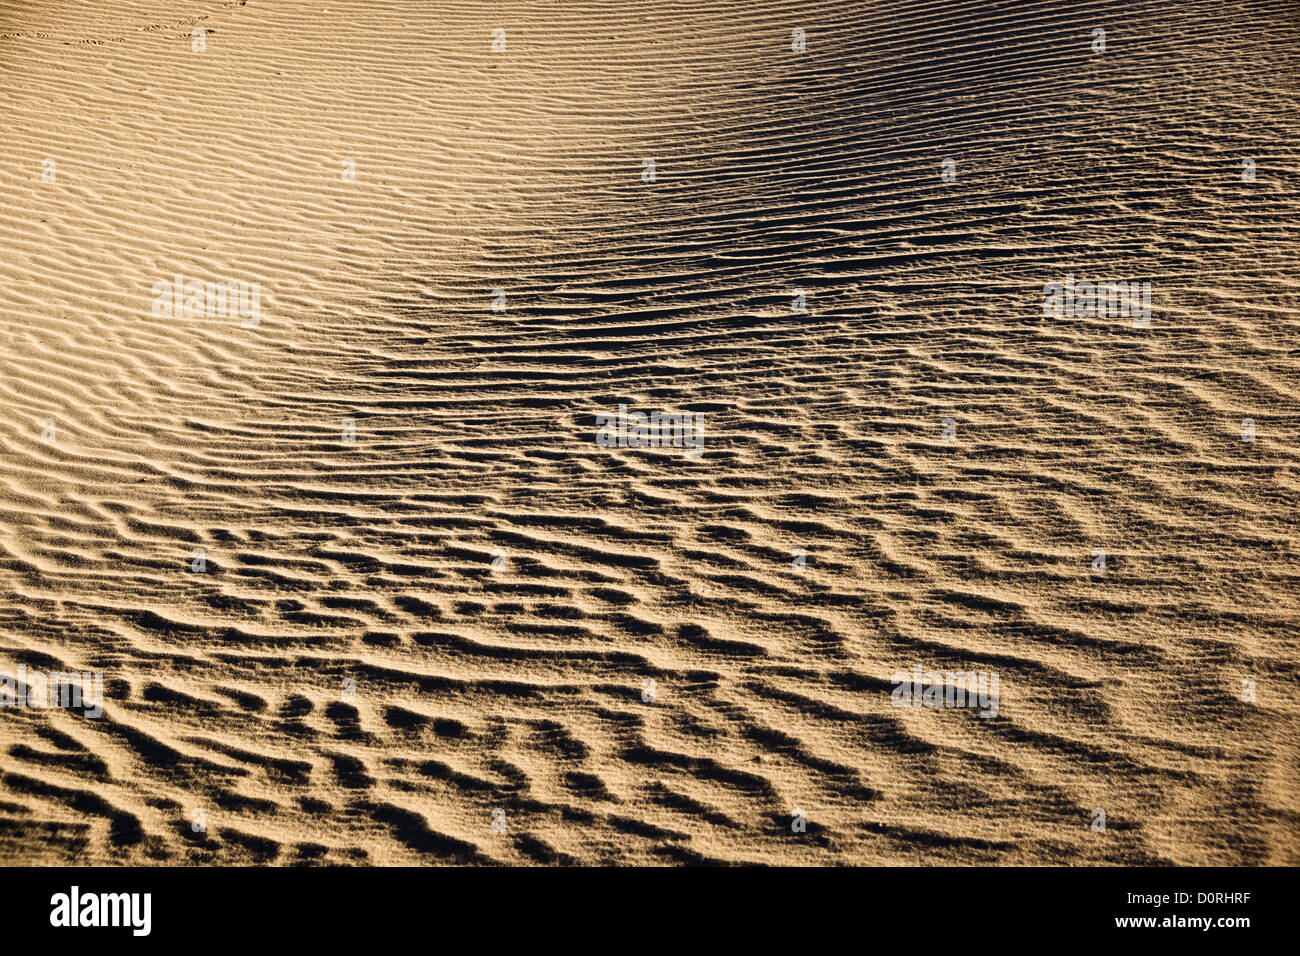 Death Valley Sand Ripples Banque D'Images